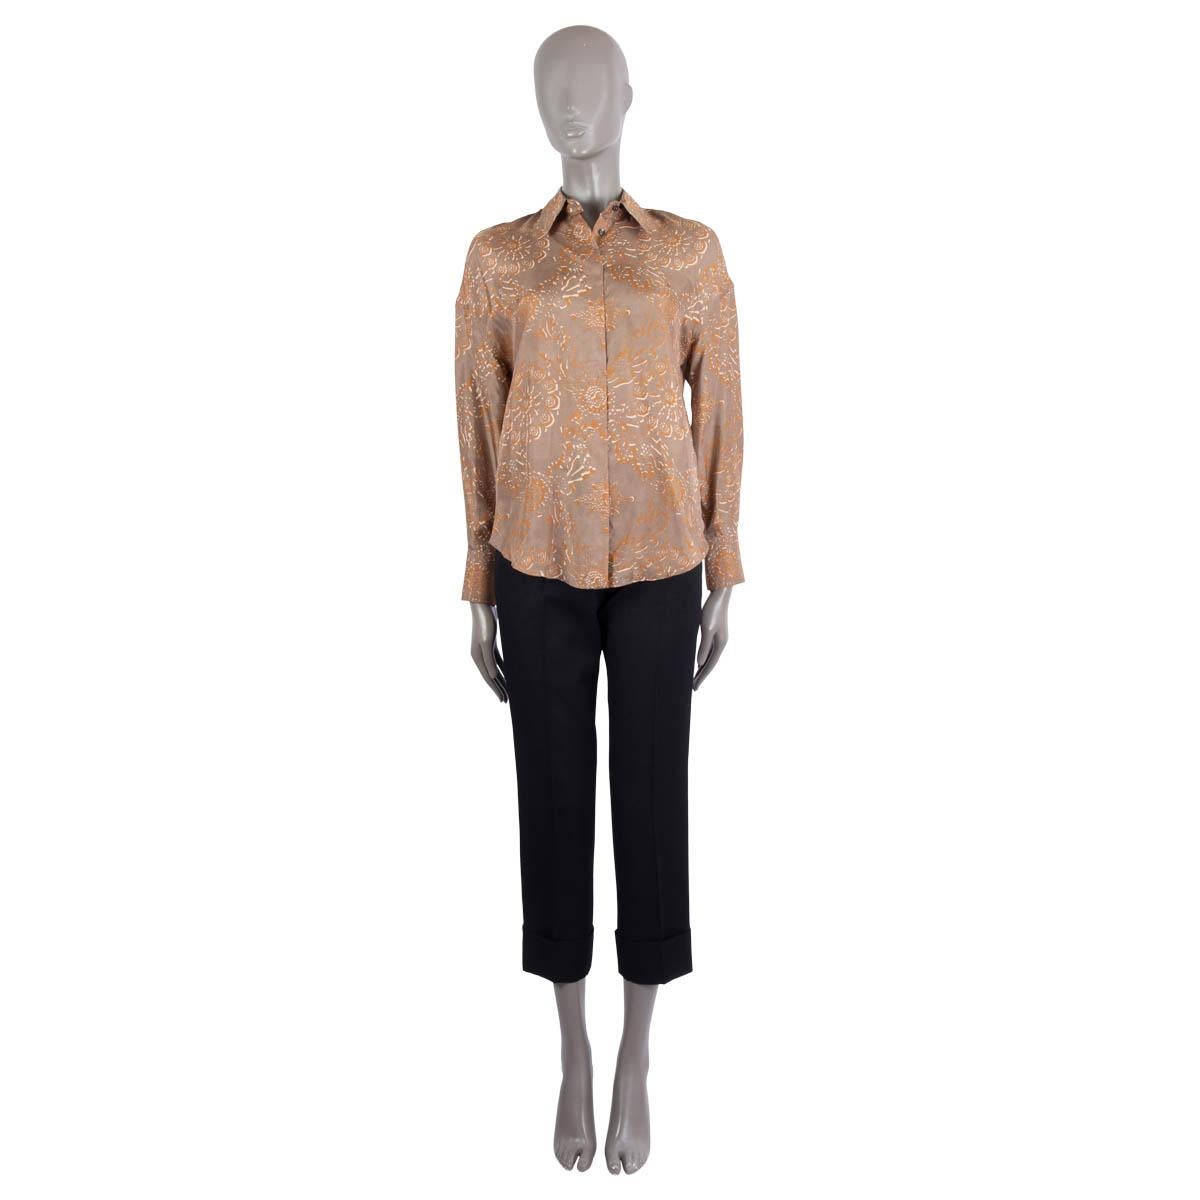 100% authentic Brunello Cucinelli floral silk (100%) shirt in grey, brown and ivory. Closes with concealed front button. Pre-owned - excellent condition.

Measurements
Tag Size	XS
Size	XS
Shoulder Width	50cm (19.5in)
Bust From	102cm (39.8in)
Hips